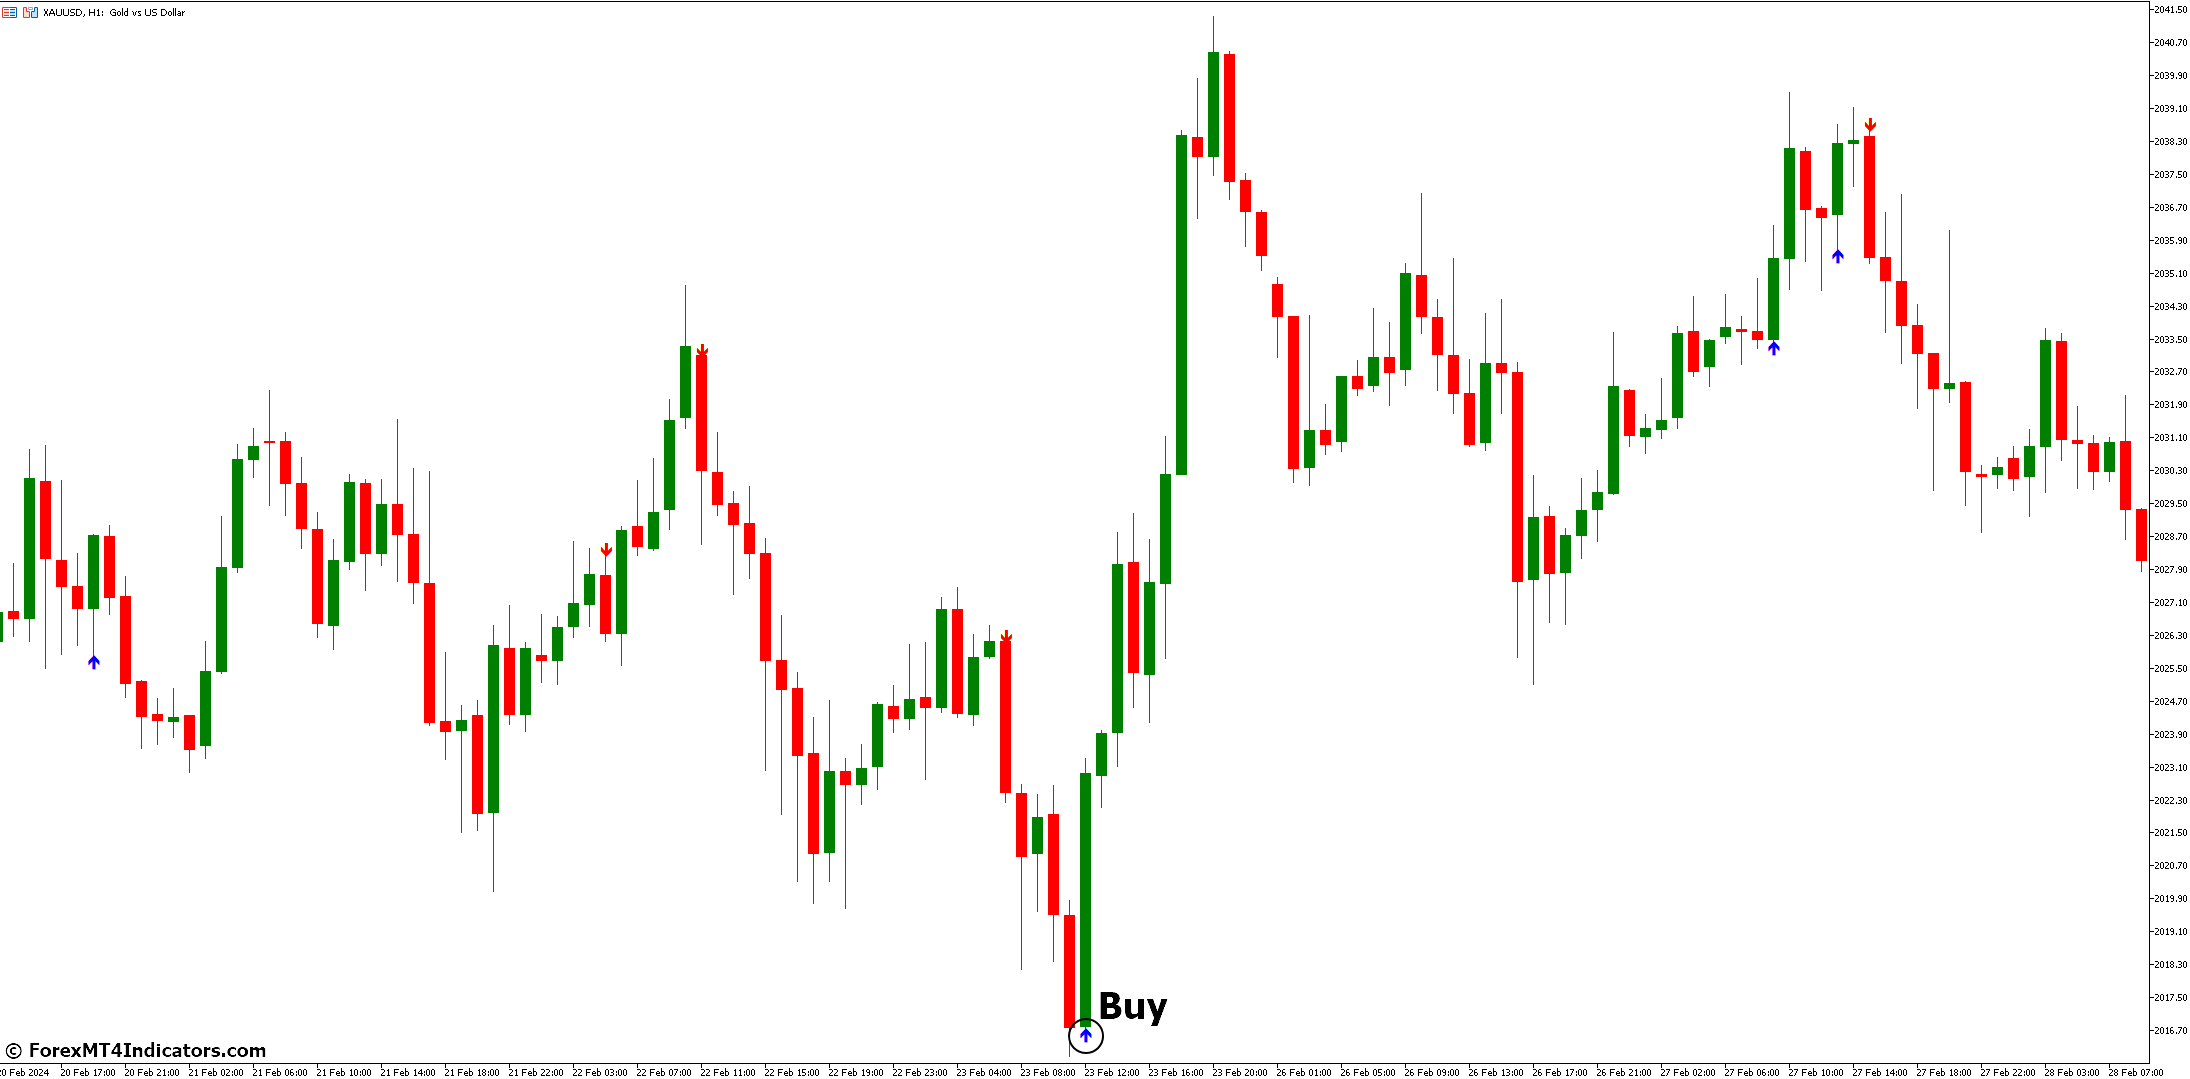 How to Trade With Key Reversal Indicator - Buy Entry